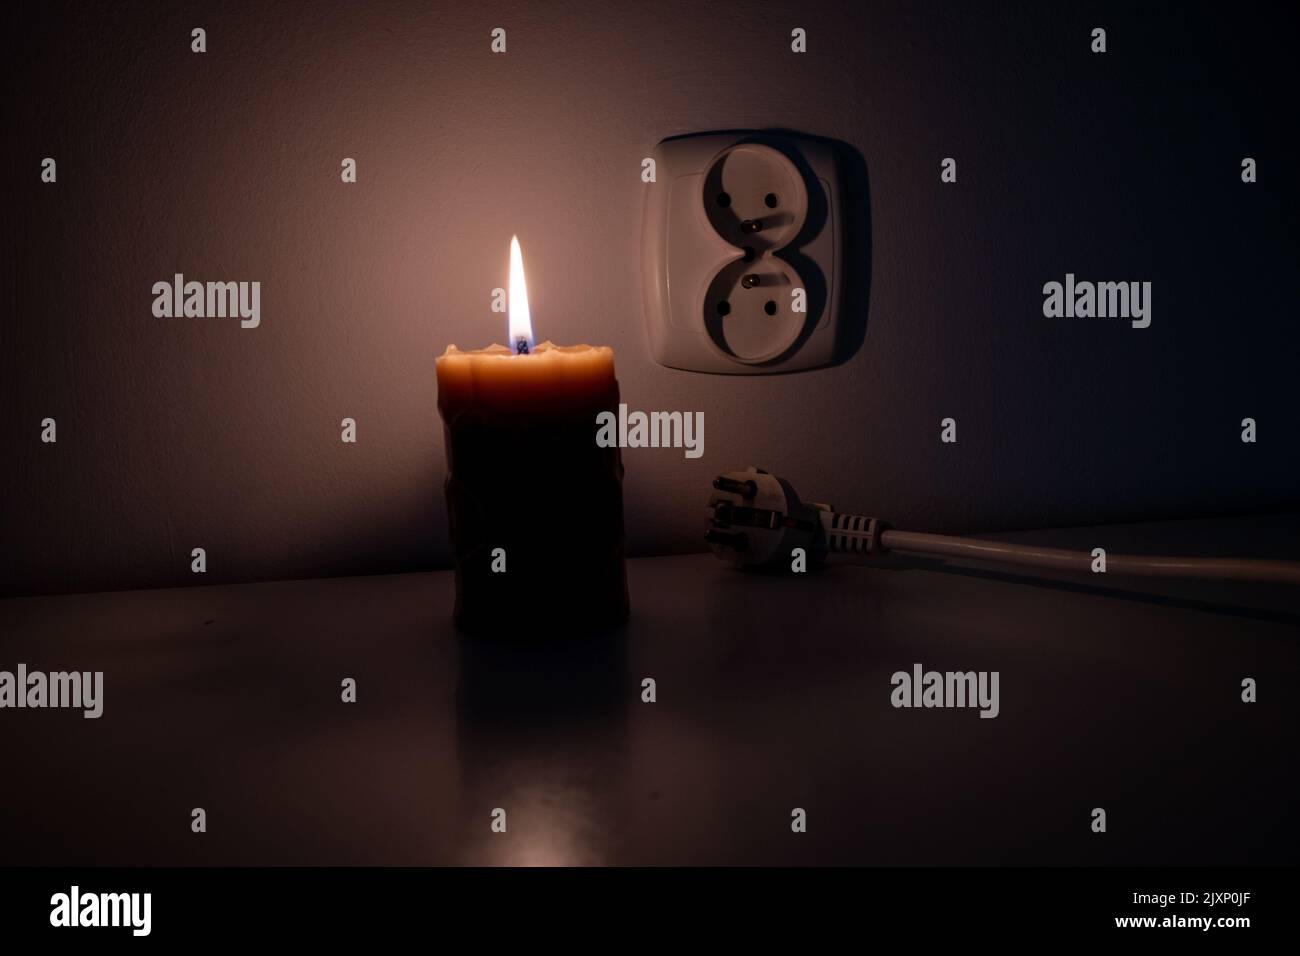 https://c8.alamy.com/comp/2JXP0JF/blackout-candle-with-a-socket-power-cut-no-electricity-the-flame-of-a-candle-circuit-breaker-electrical-outlet-plug-2JXP0JF.jpg